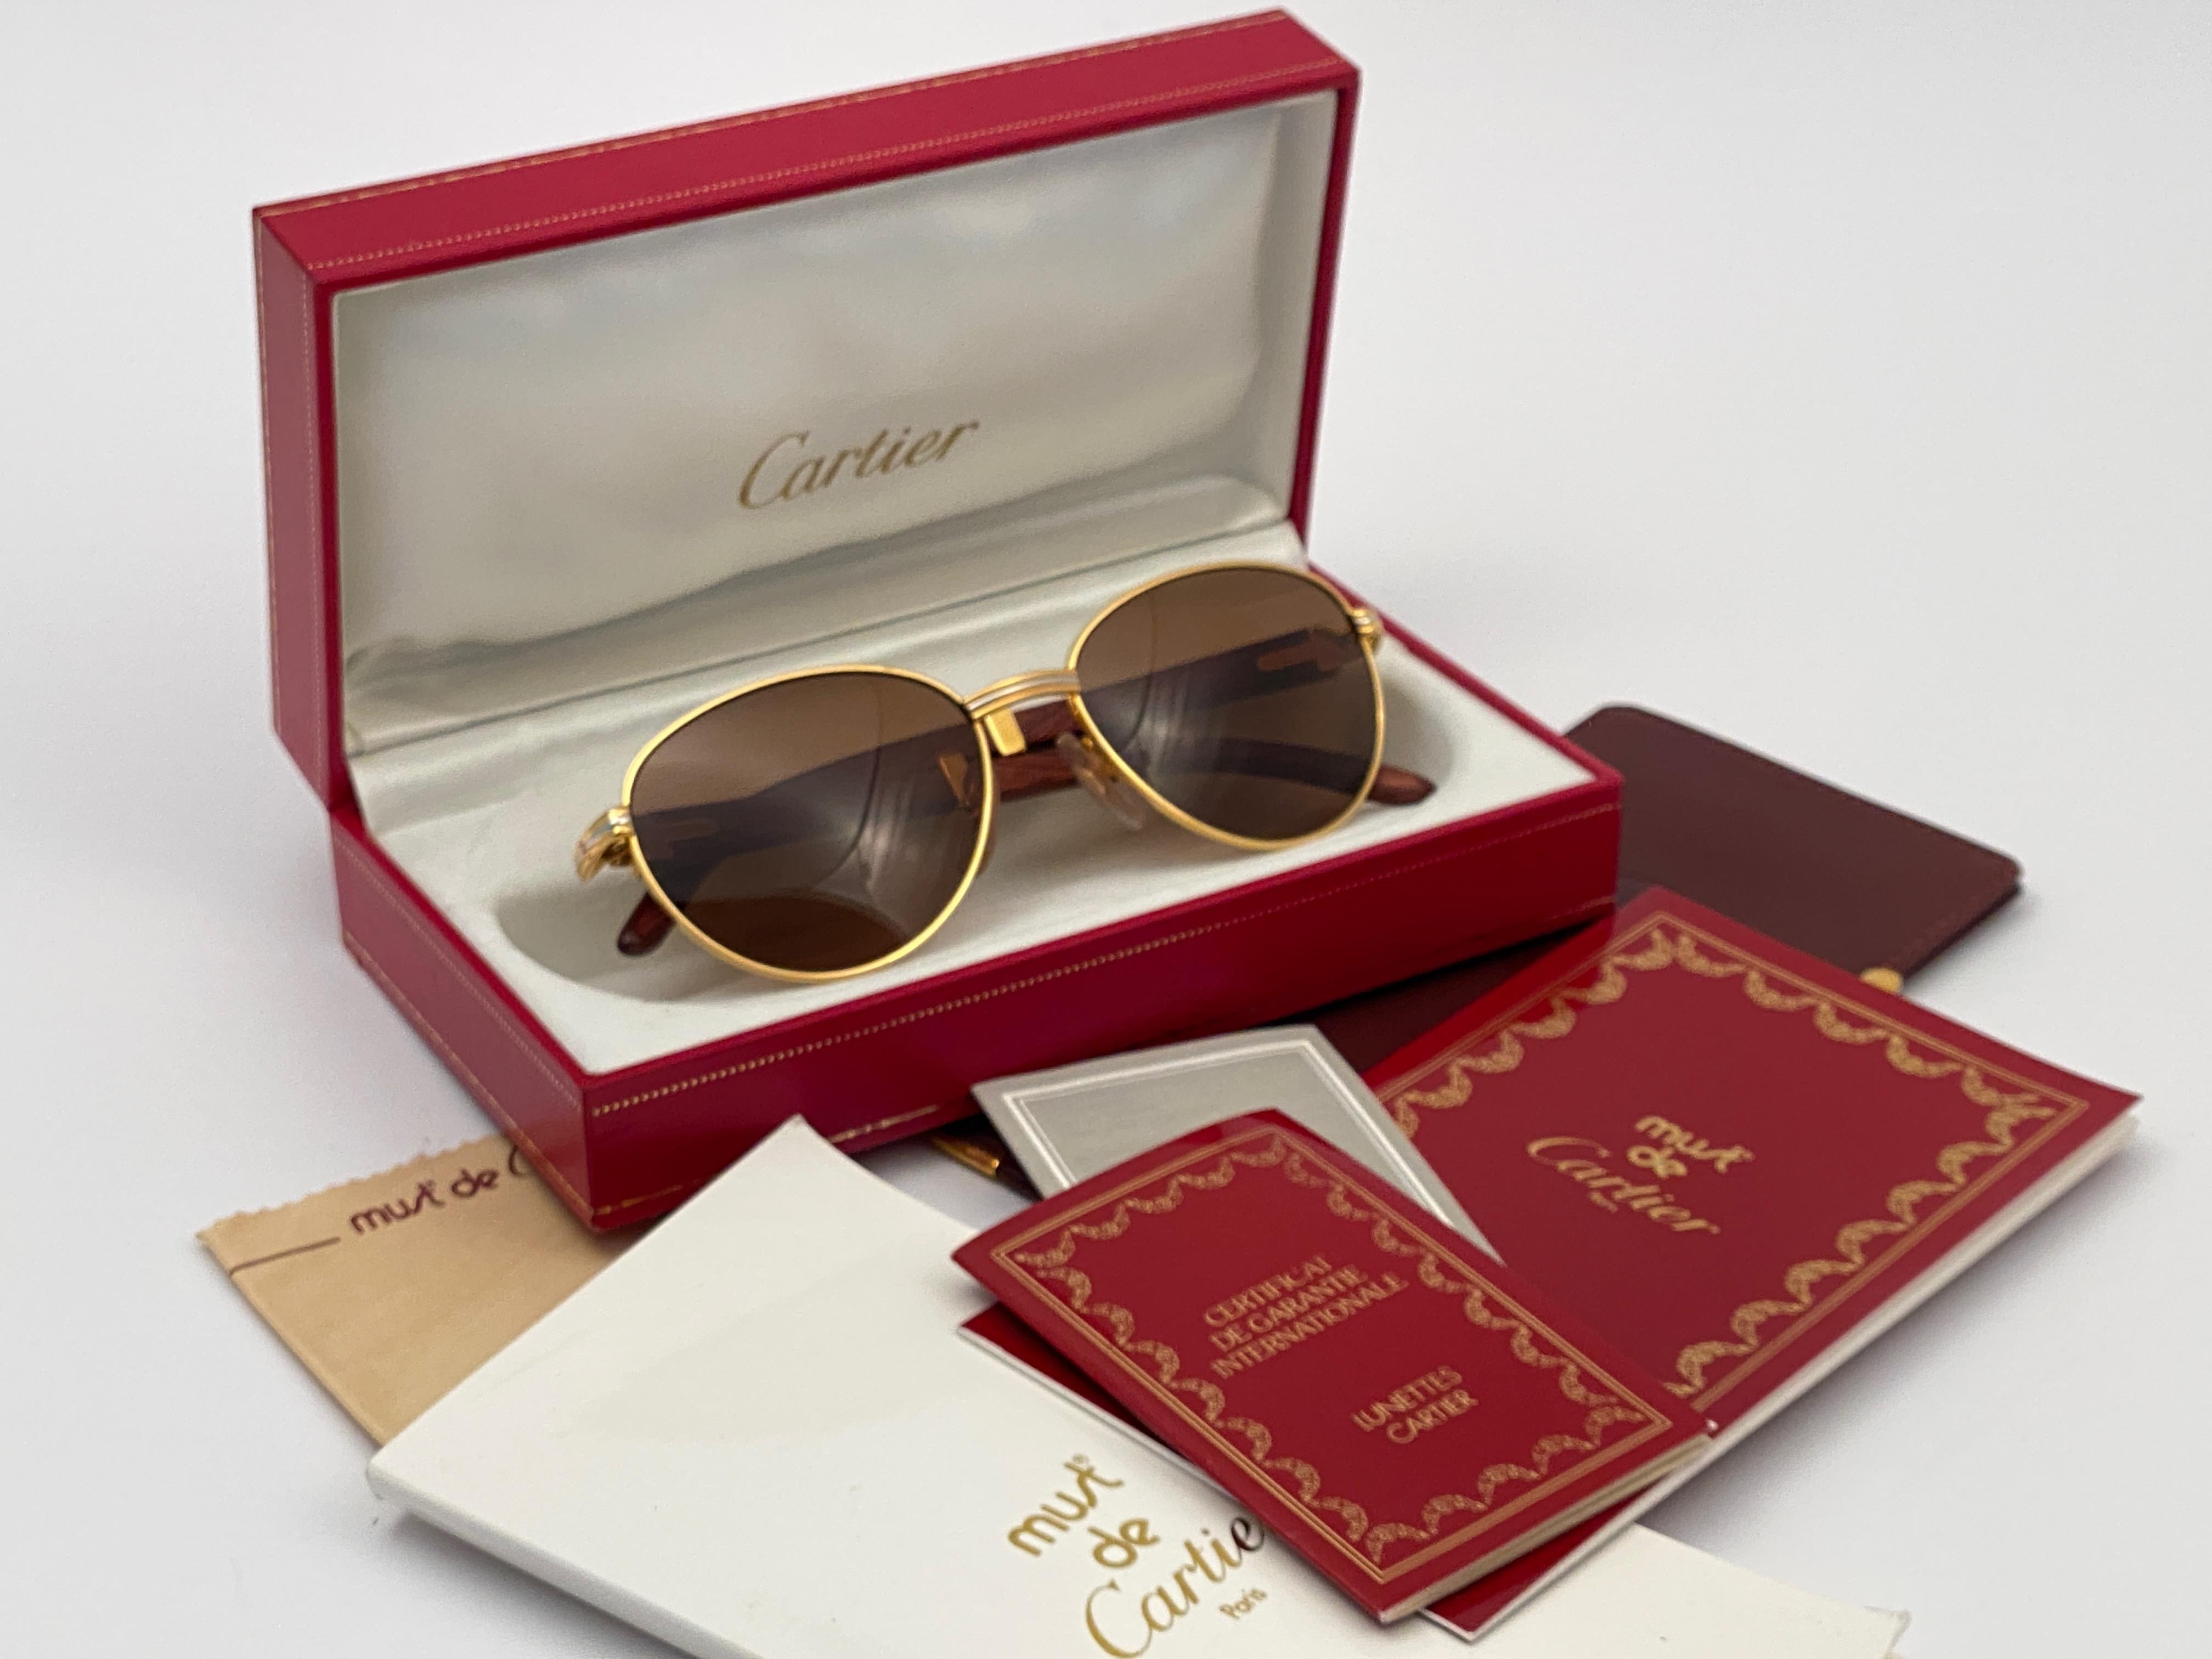 New 1990 Cartier Full Set Auteuil Hardwood Sunglasses with new solid honey brown (uv protection) lenses. 
Frame is with the front and sides in yellow and white gold and has the famous wood & gold accents temples. 
Amazing craftsmanship! All